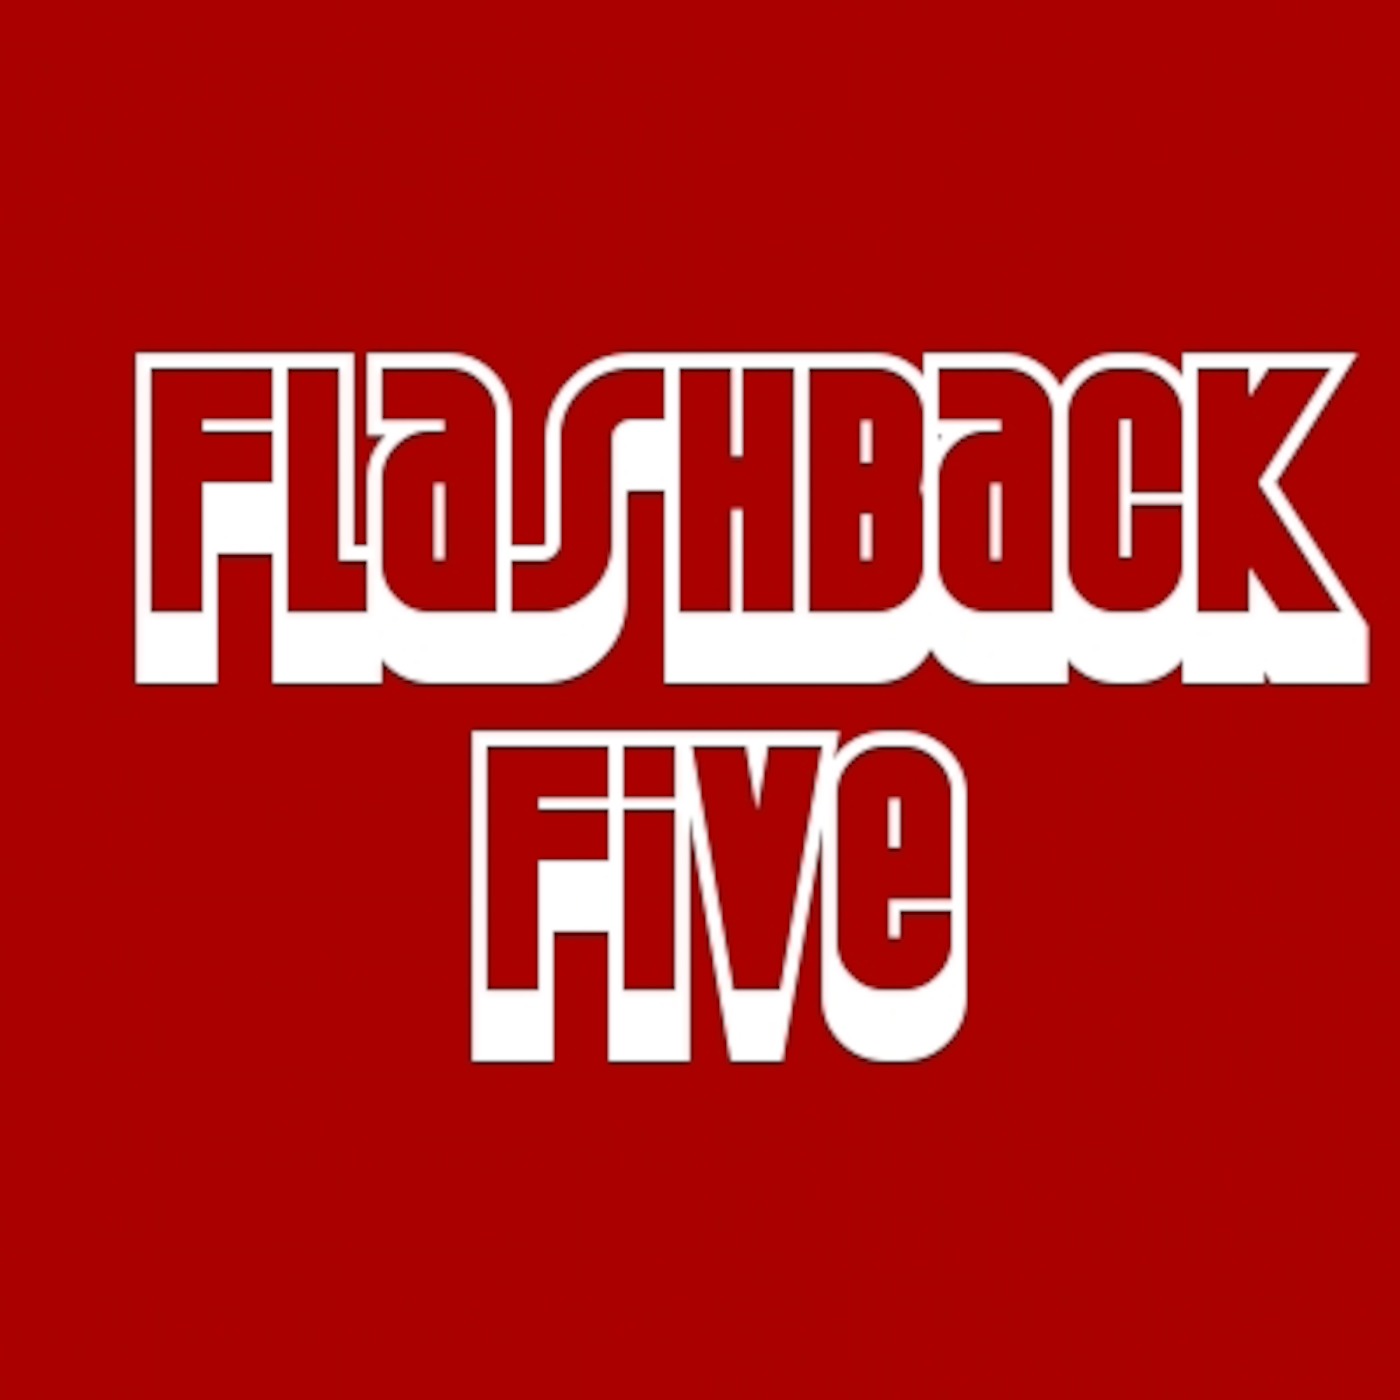 Flashback Five Episode 2-Top 5 Most Anticipated Games of 2015